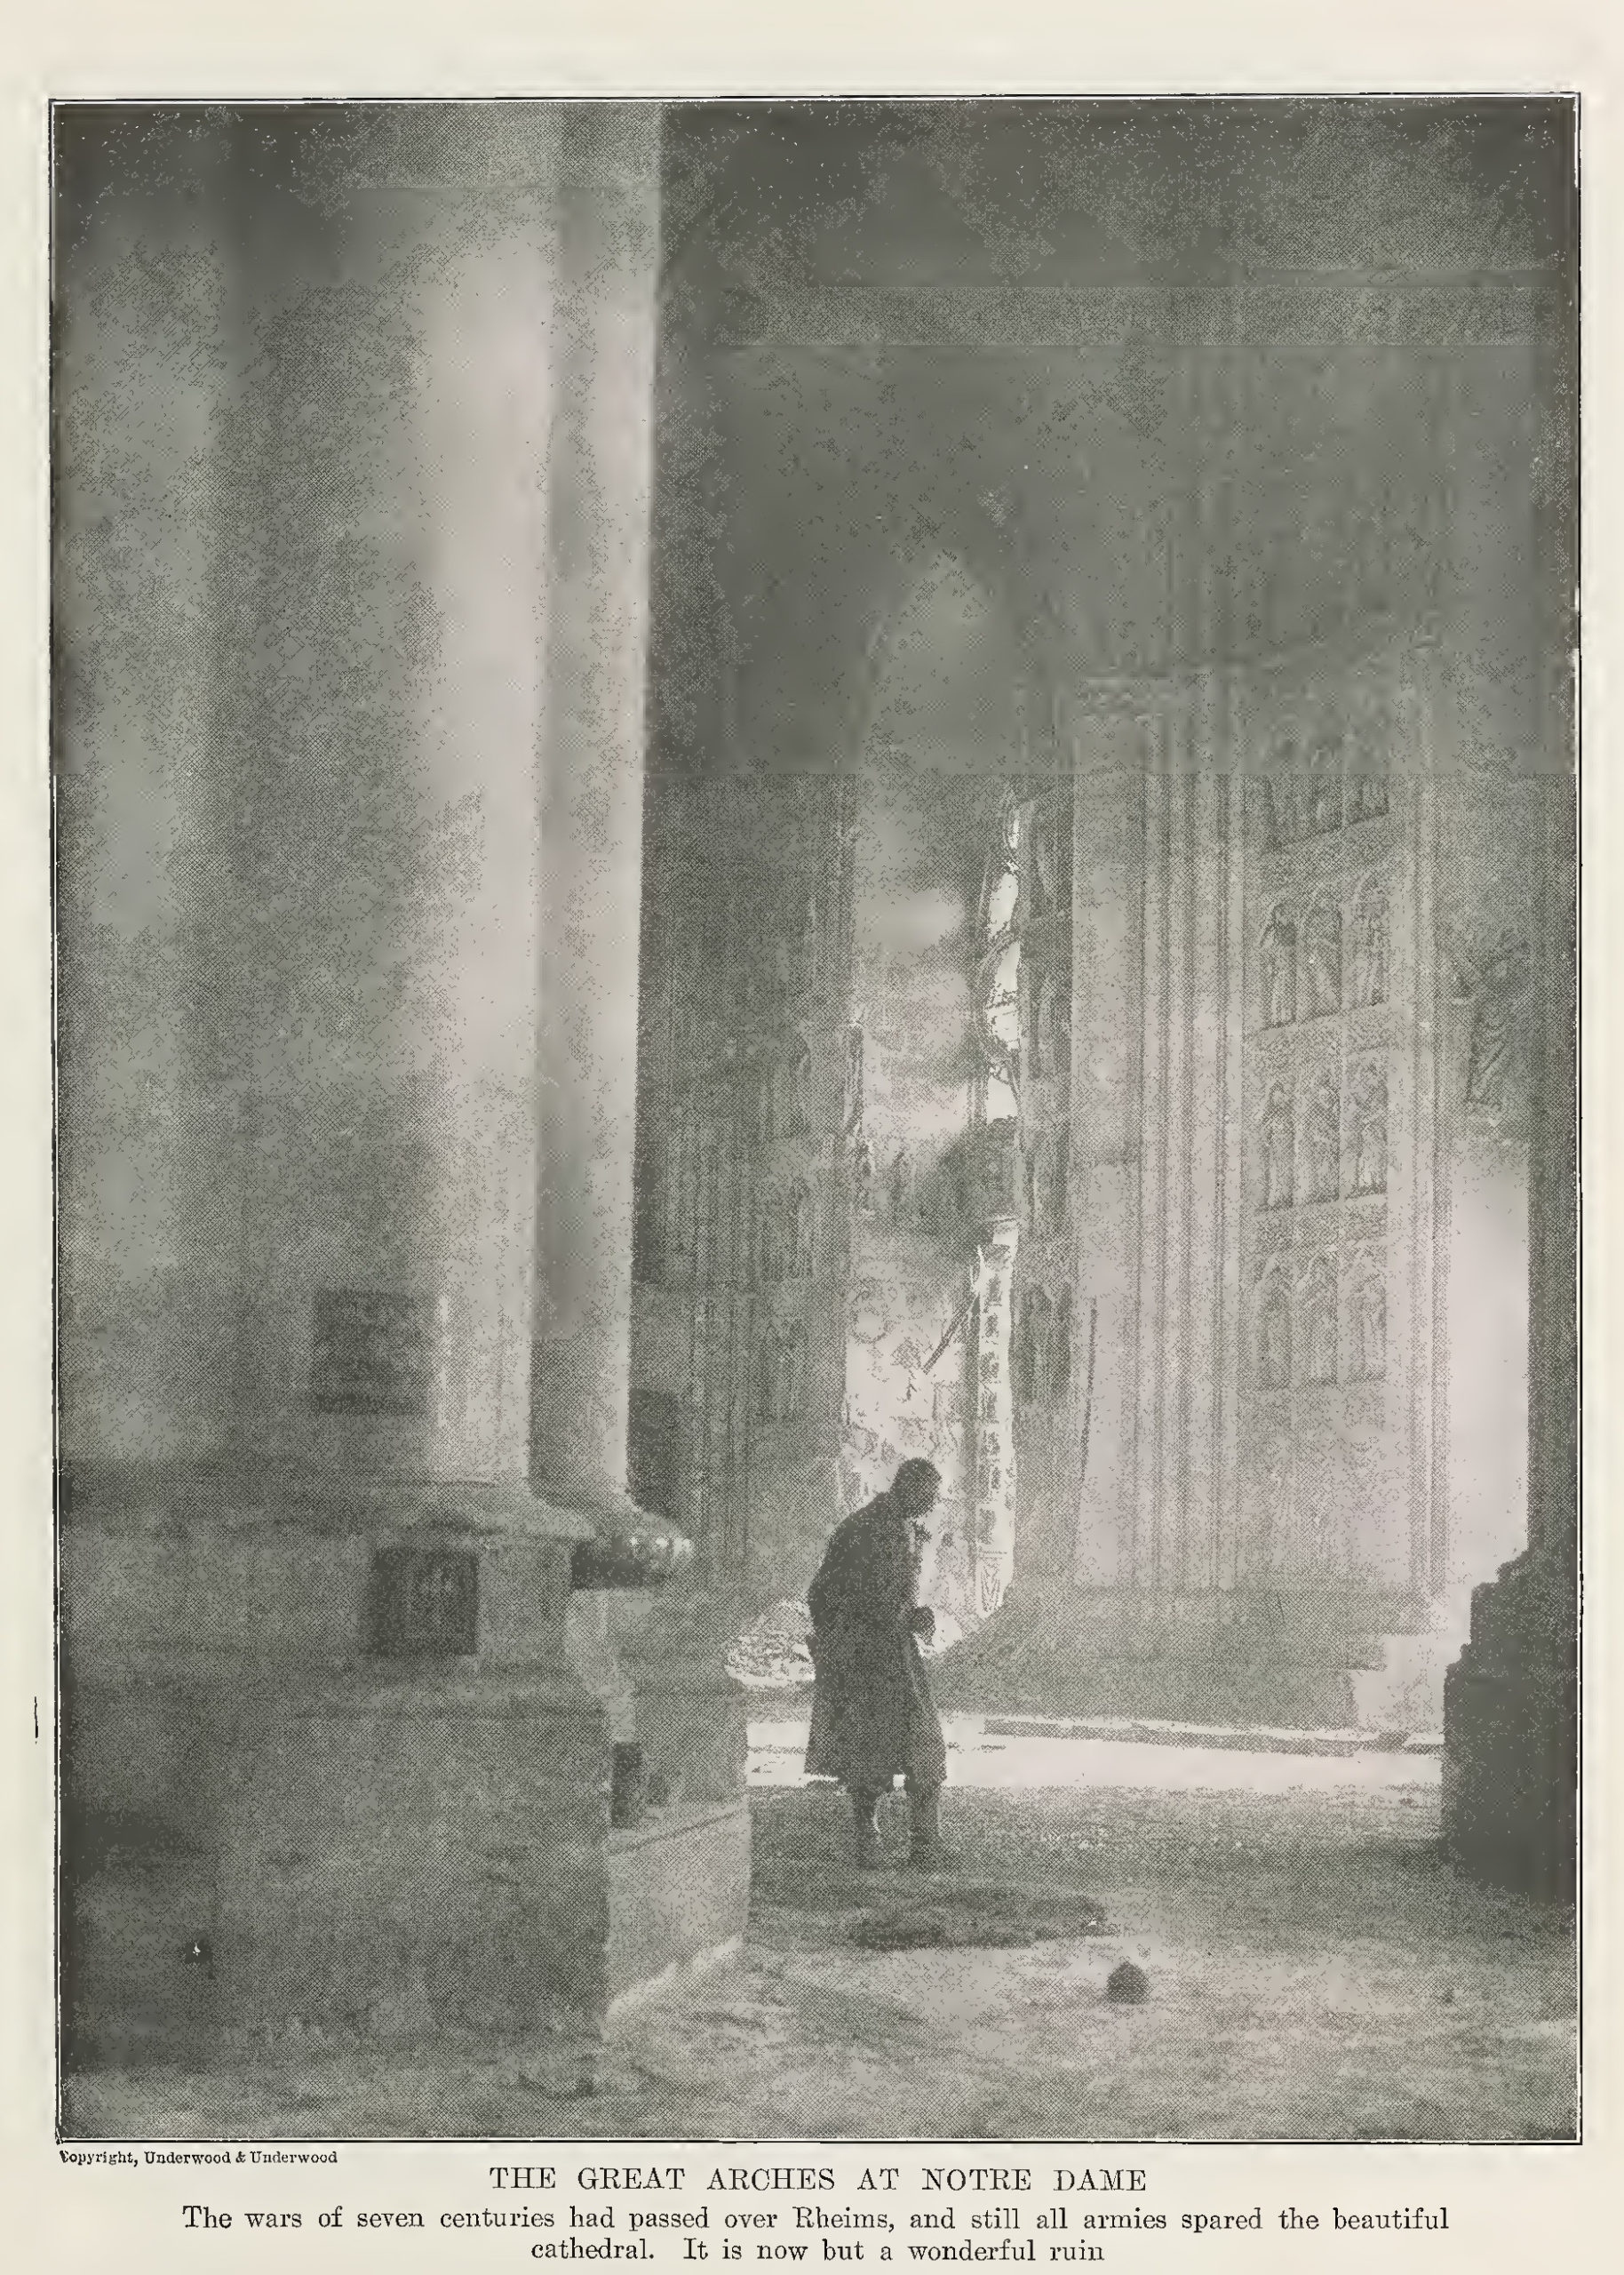 “The great arches at Notre Dame: The wars of seven centuries had passed over Reims, and still all armies spared the beautiful cathedral. Is is now but a wonderful ruin.” from Collier’s Photographic History of the European War, by Francis J. Reynolds and C. W. Taylor, c. 1917